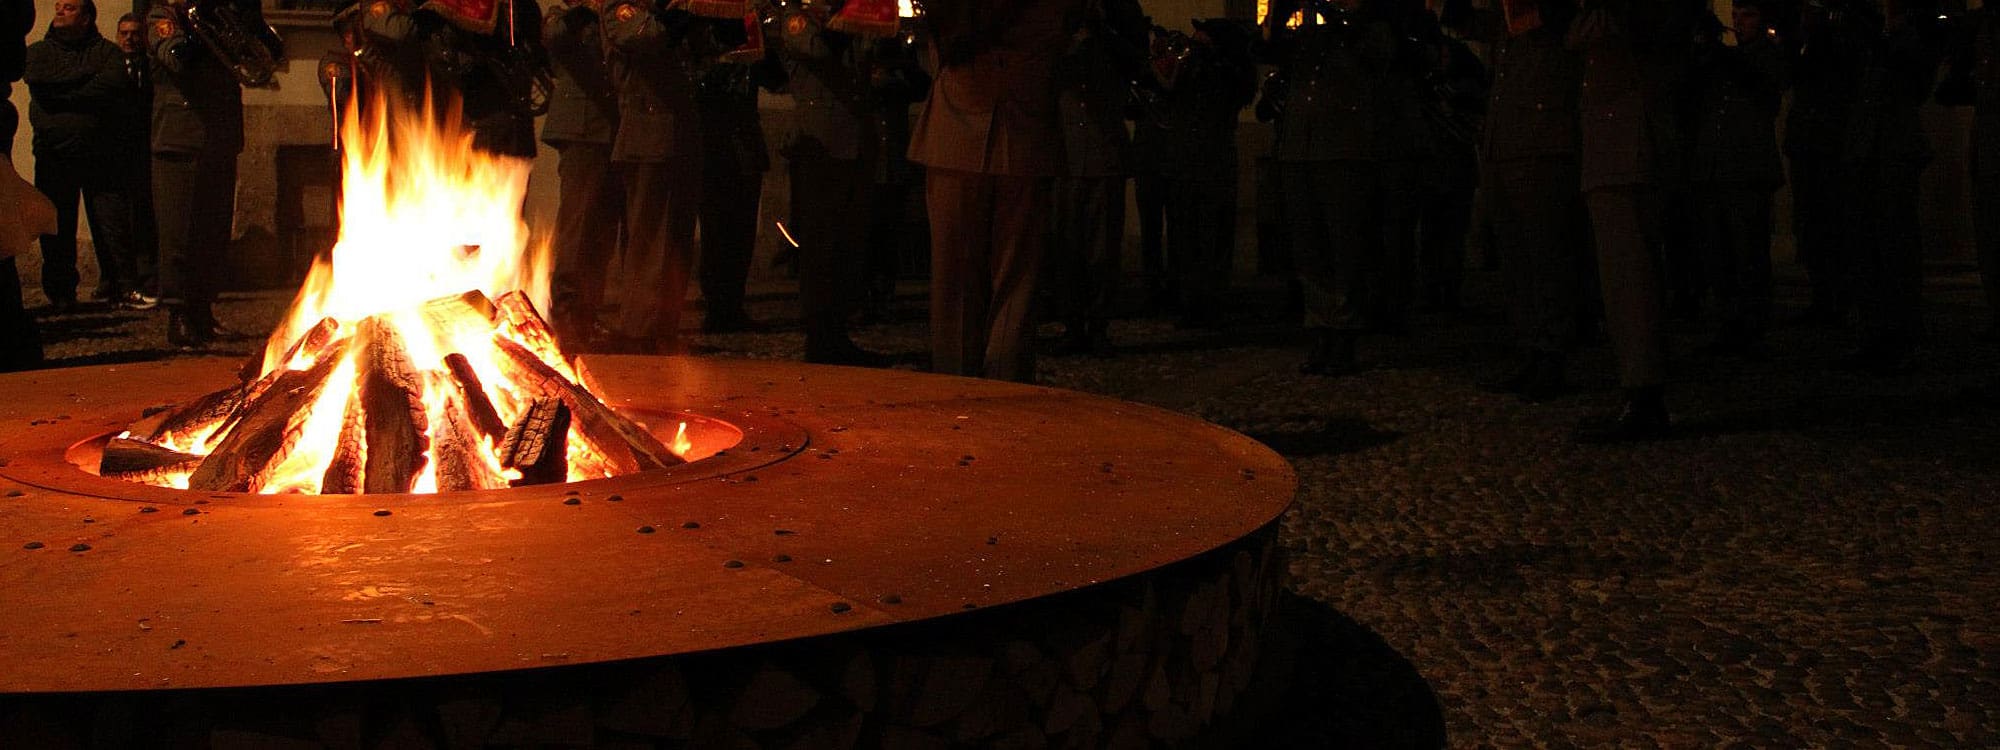 Image of flaming embers held within Zero circular fire pit in corten steel by AK47 Design